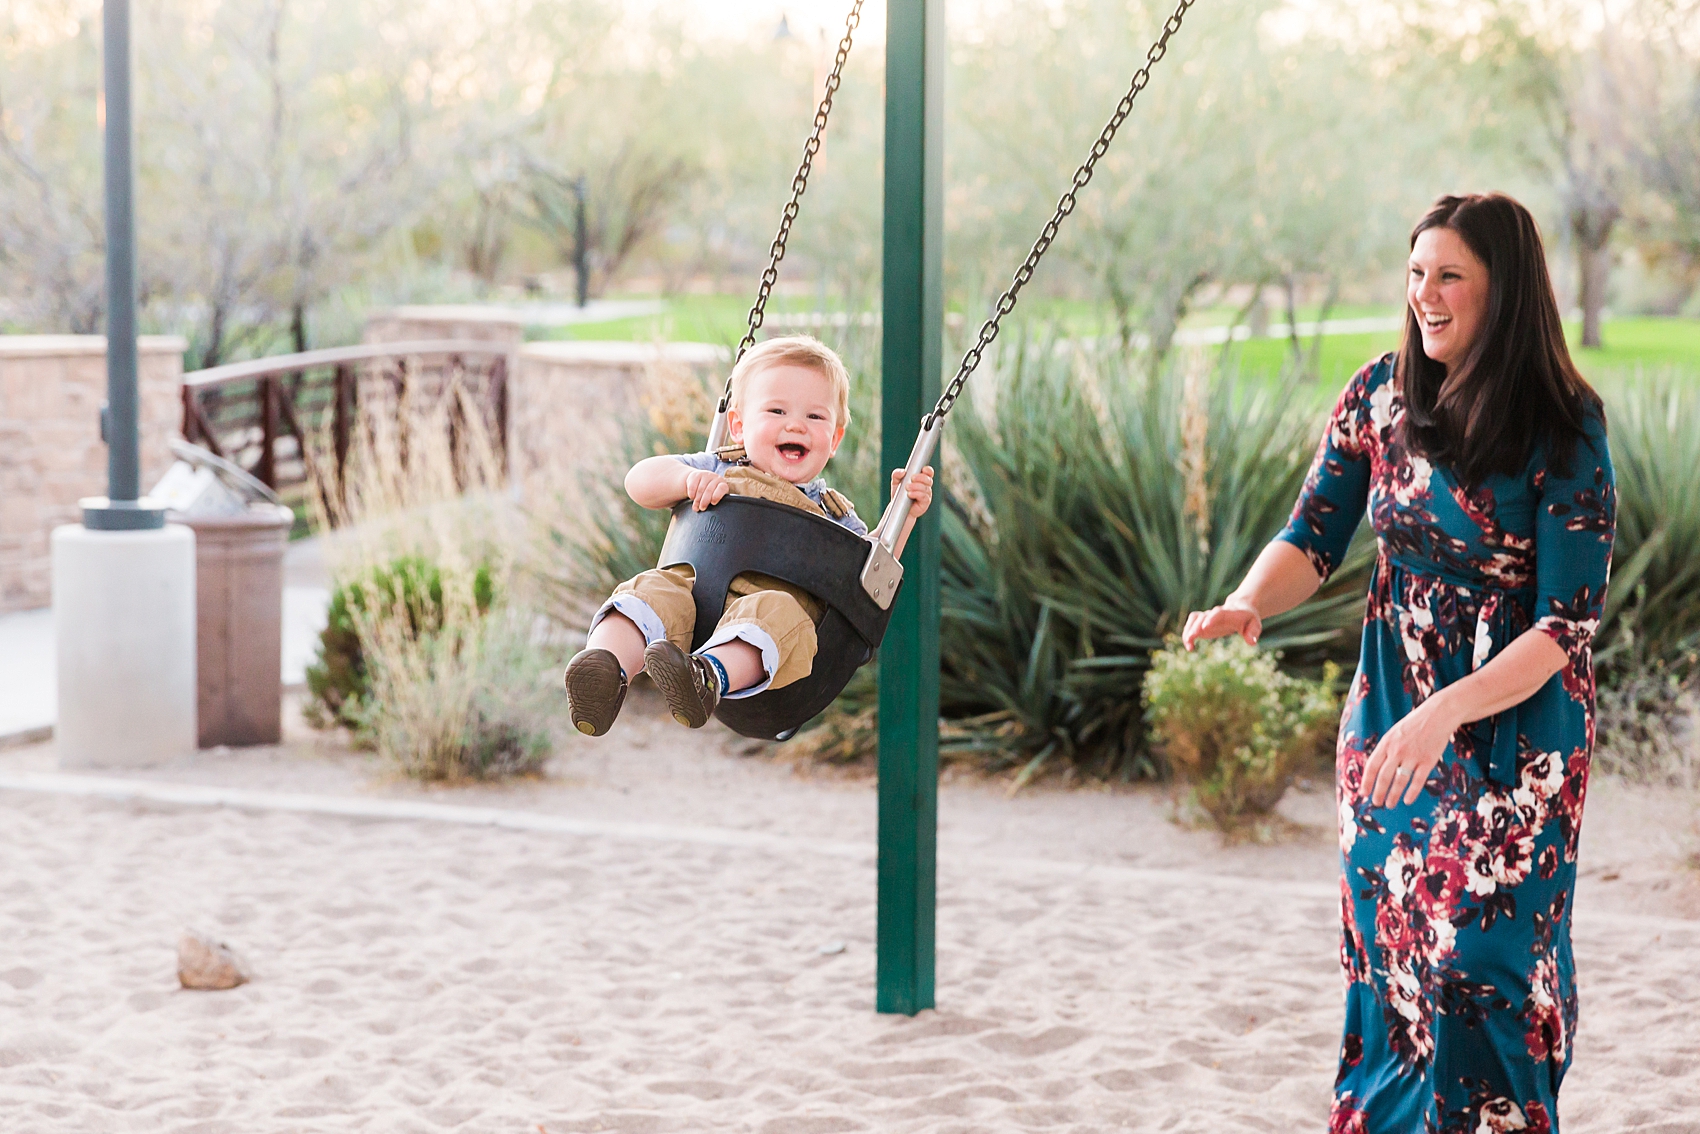 Leah Hope Photography | Scottsdale Phoenix Arizona | Desert Landscape | Green Grass Nature Community Center Park | Family Pictures | What to Wear | Family Photos Poses